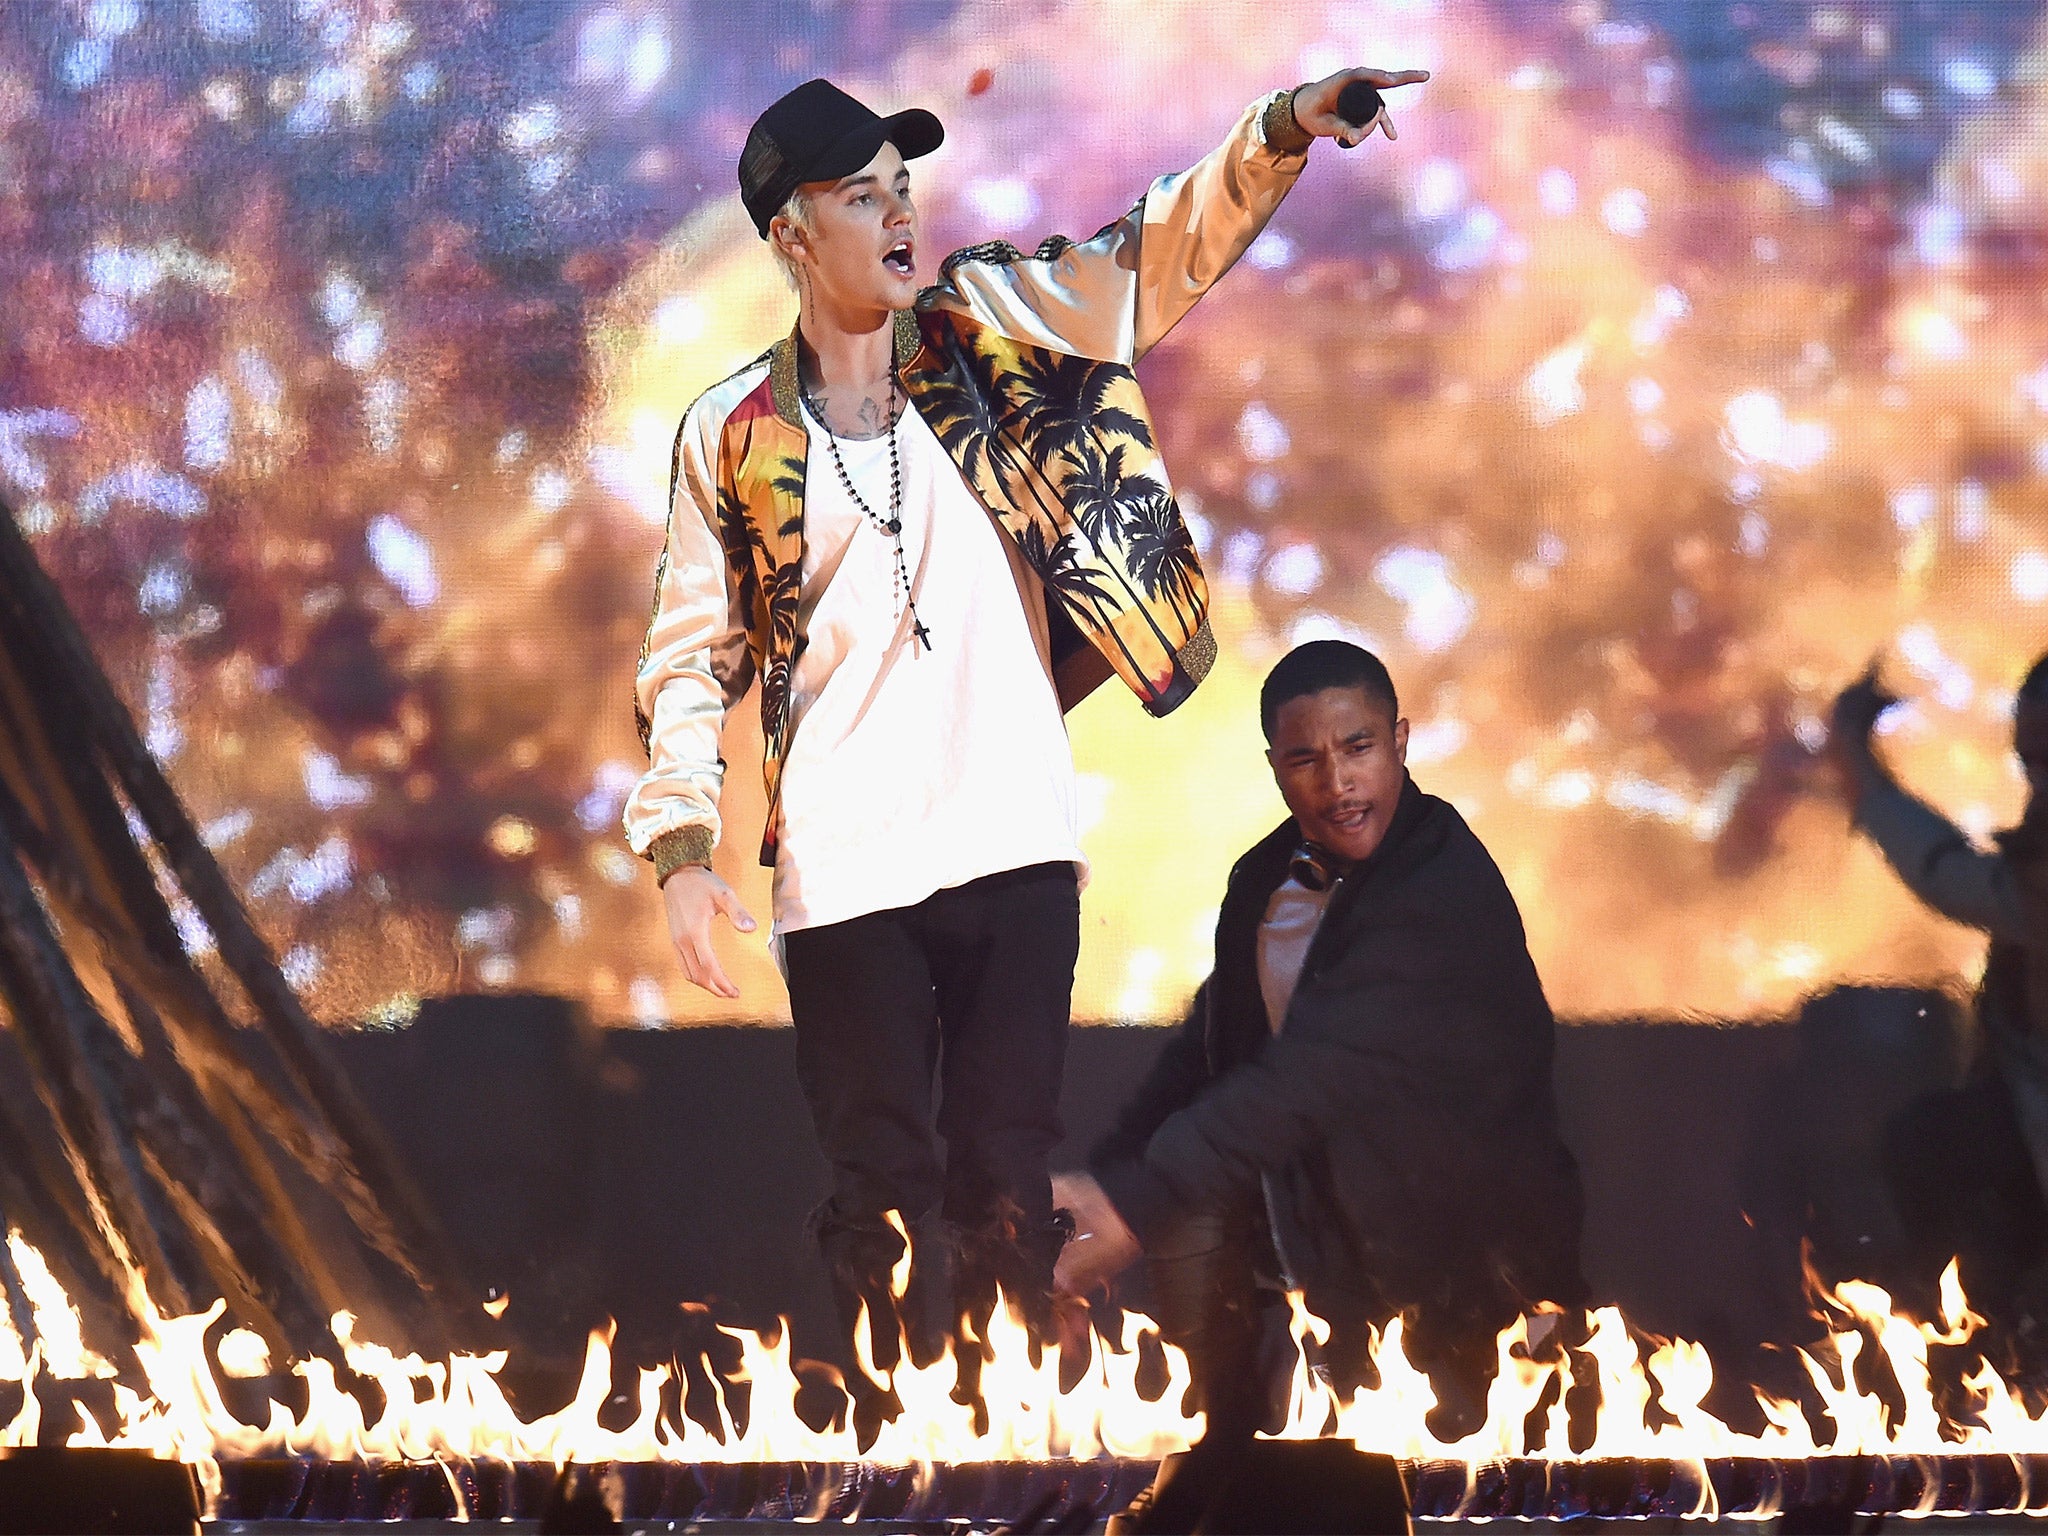 Lighting it up: Justin Bieber performs on stage during the ceremony (Getty)